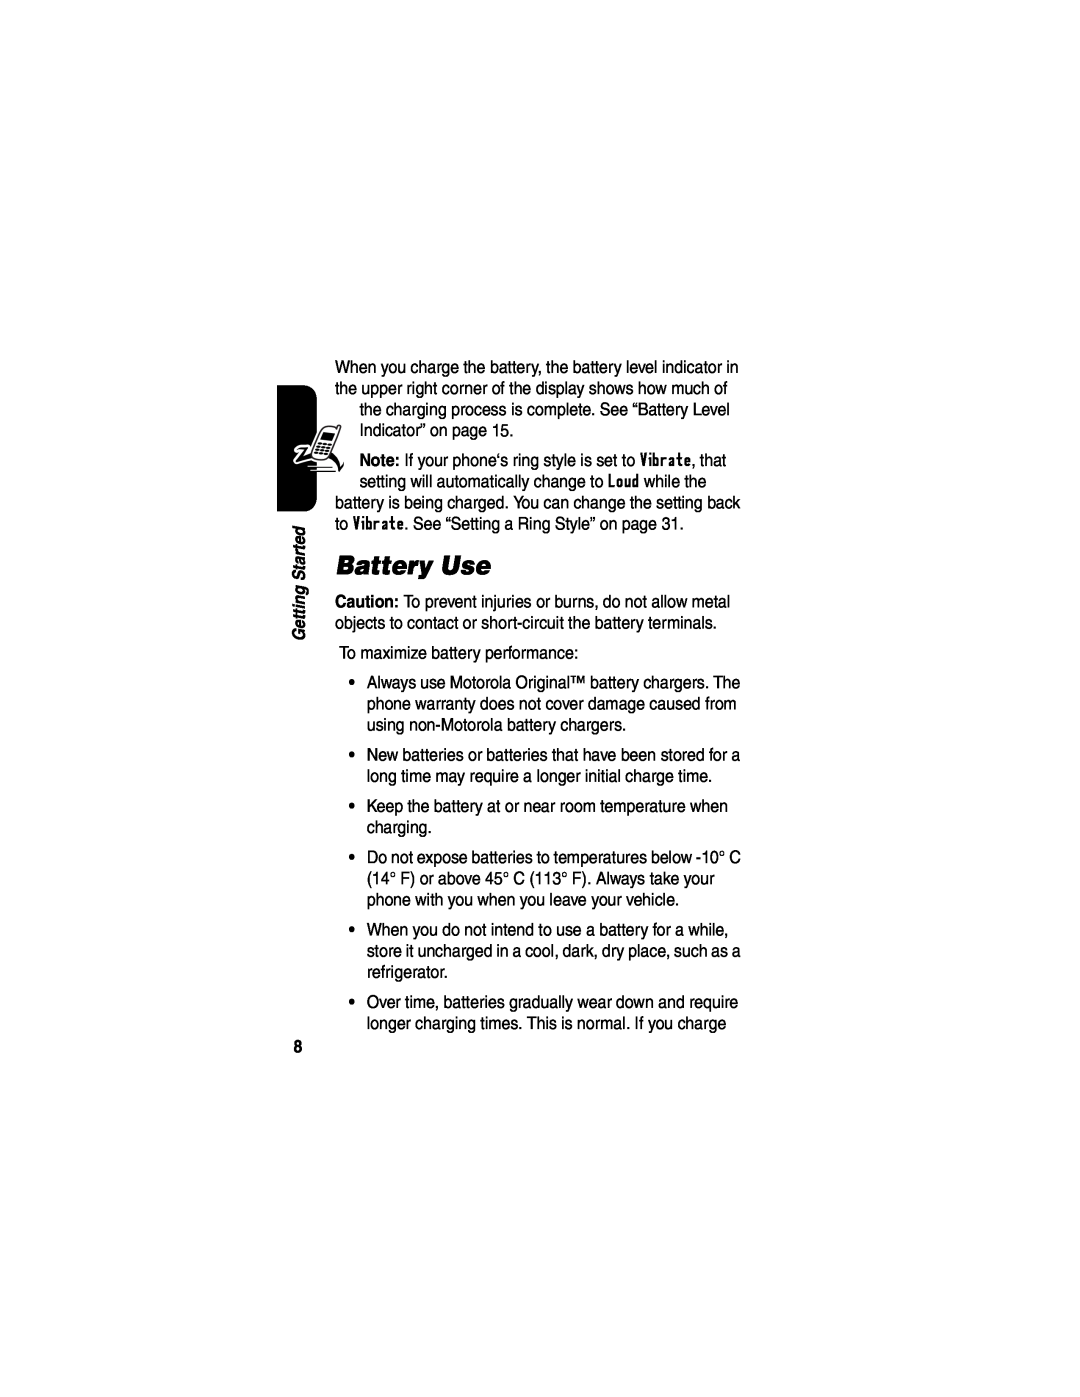 Motorola CDMA, C341a manual Battery Use, Indicator” on page, To maximize battery performance, Getting Started 